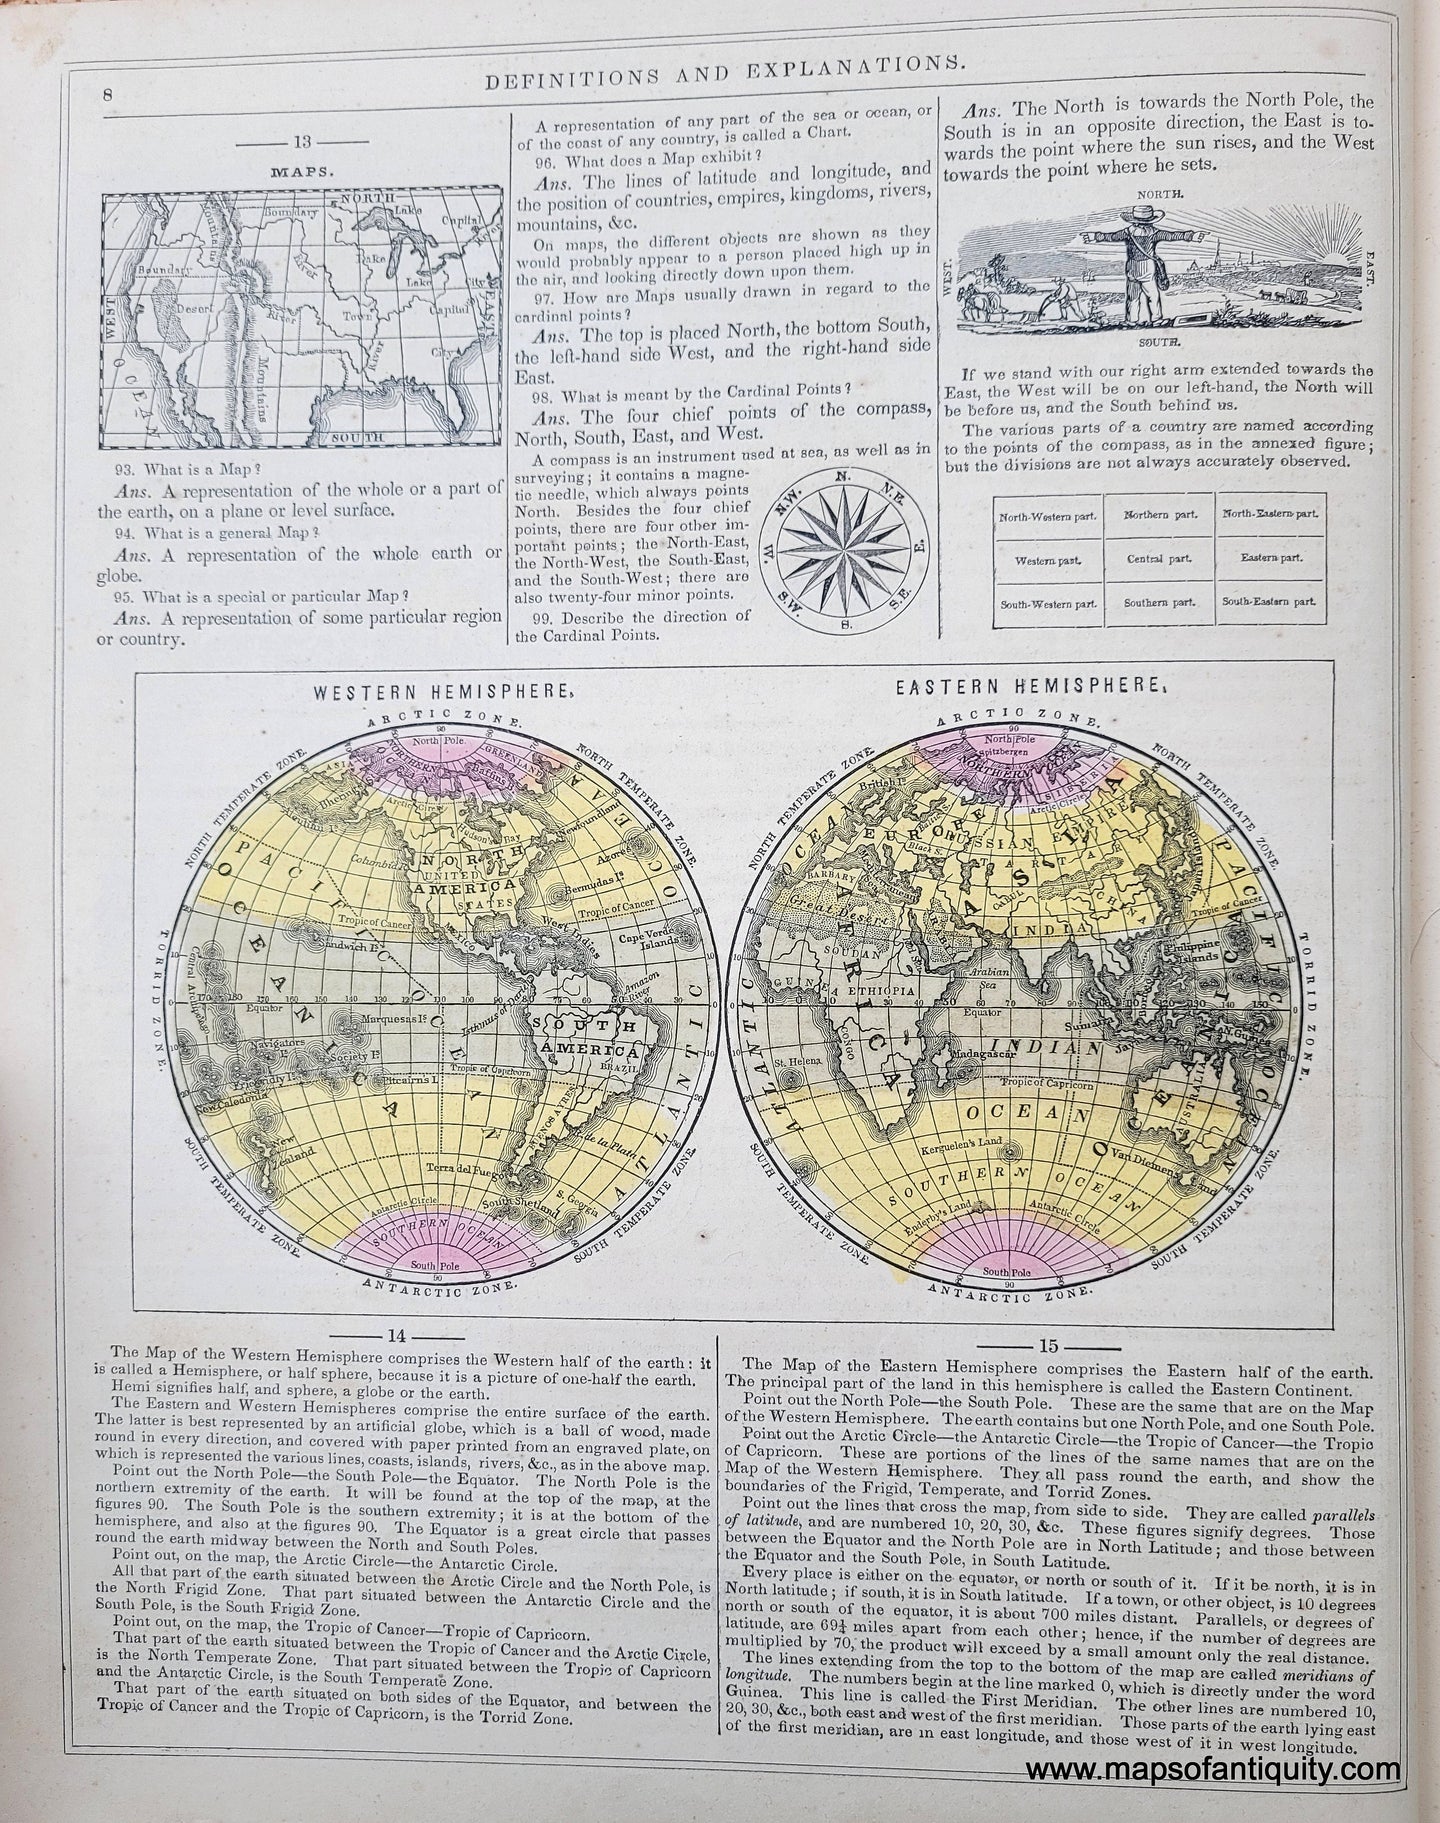 Genuine-Antique-Hand-Colored-Map-The-Hemispheres-showing-Climates-1850-Mitchell-Thomas-Cowperthwait-Co--Maps-Of-Antiquity